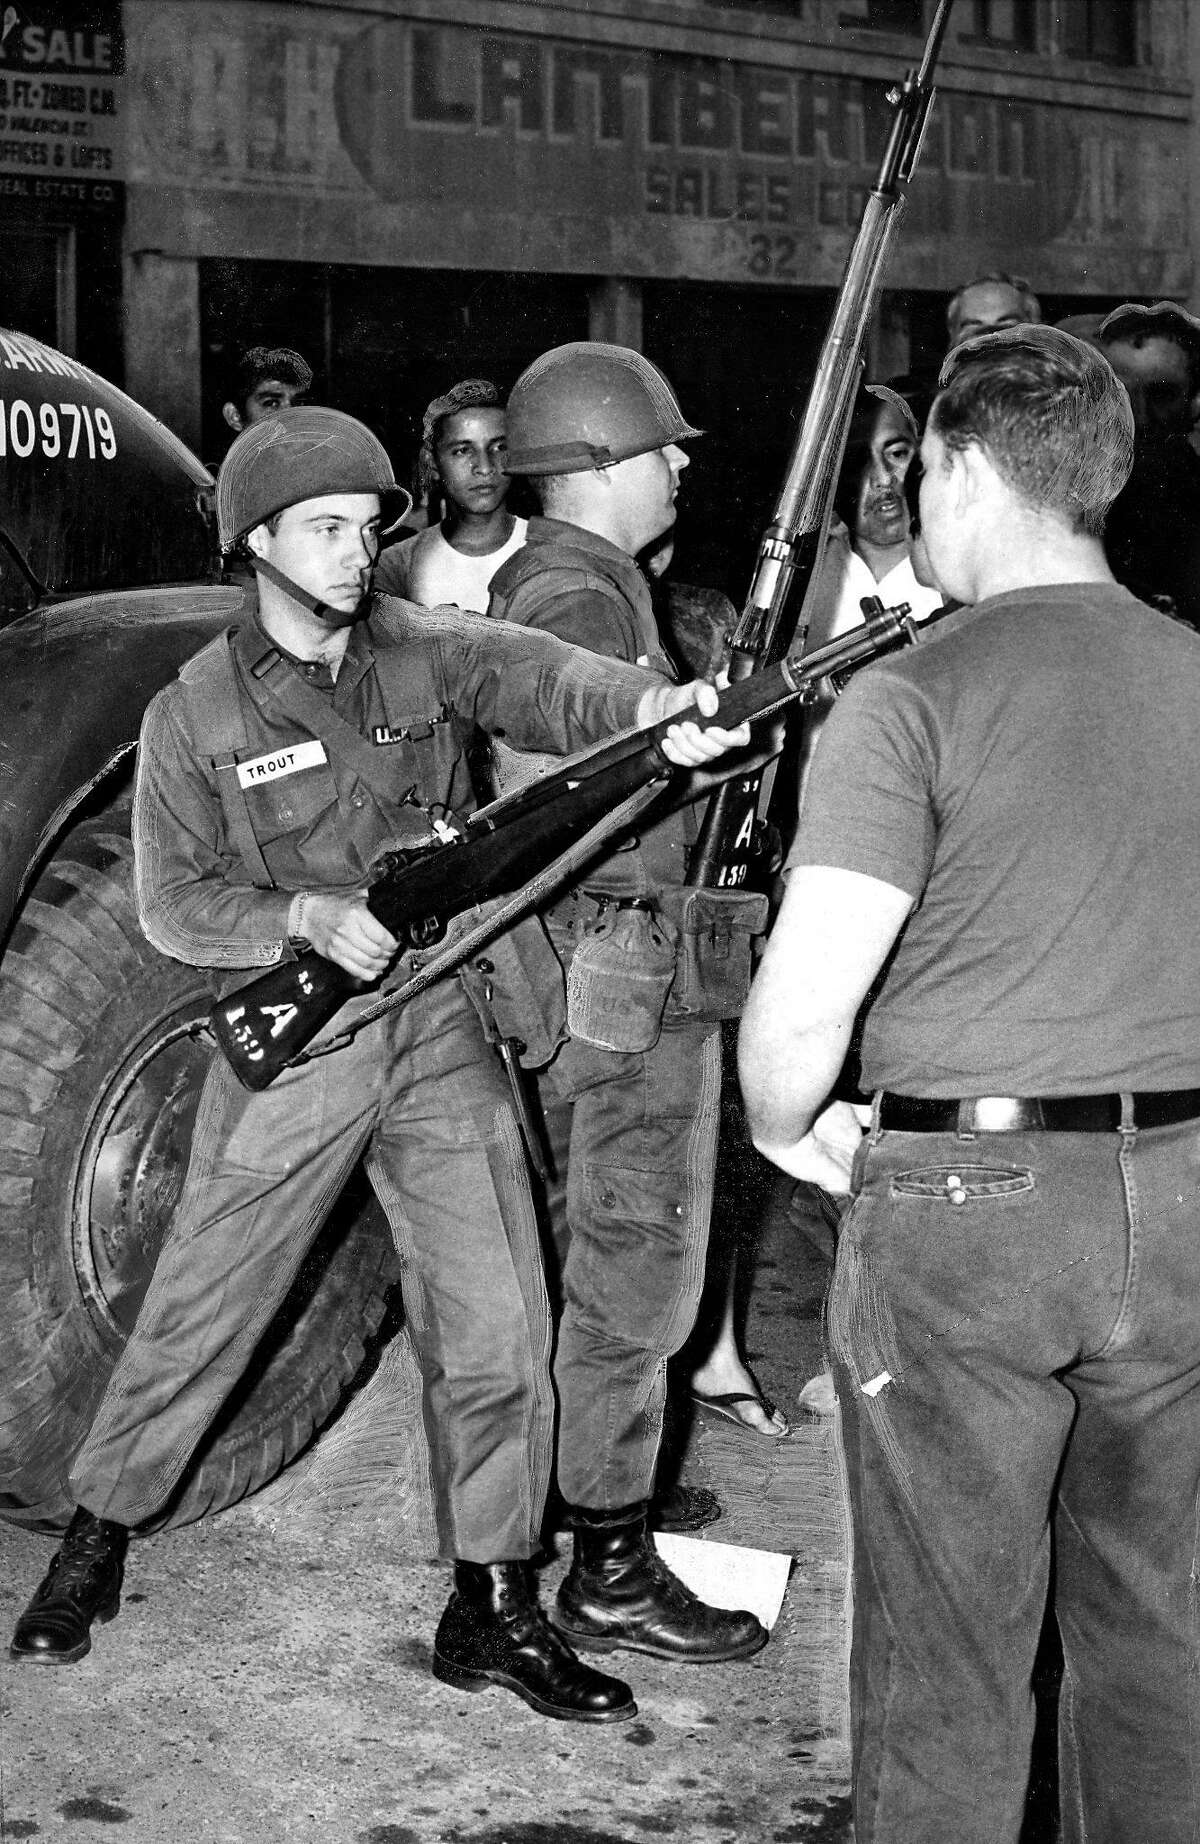 The SF riots that brought out the National Guard